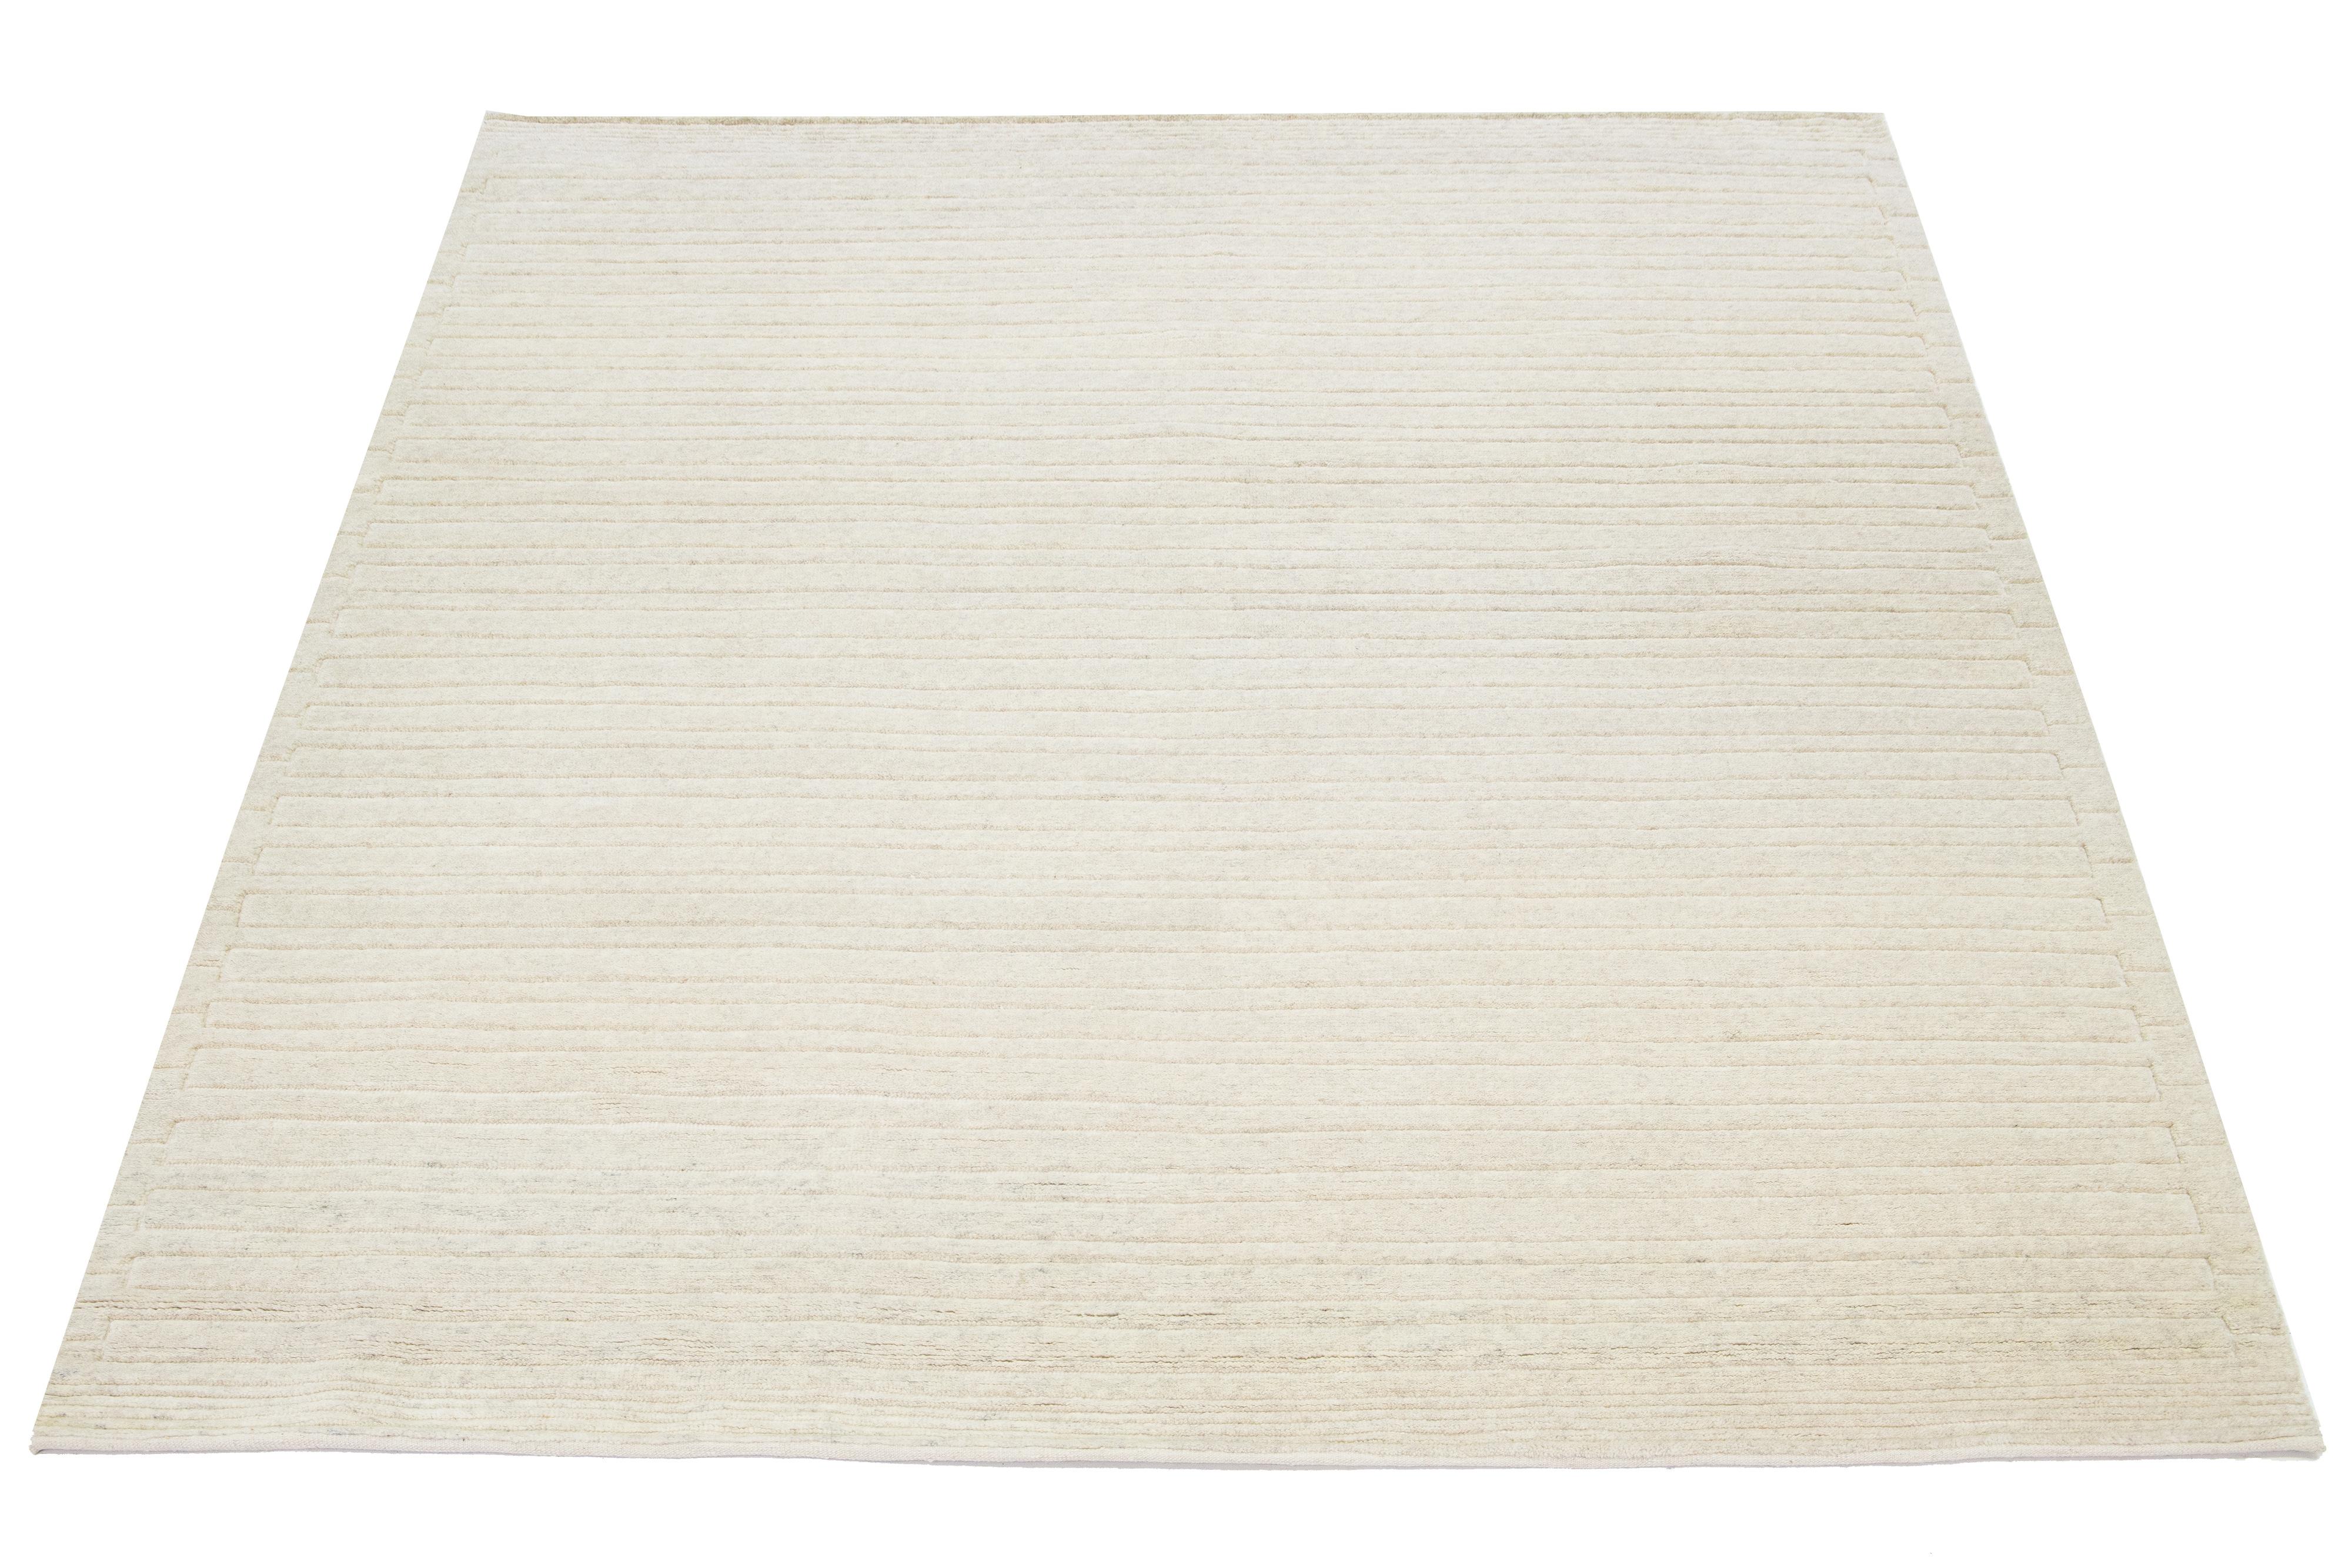 This hand-knotted rug, designed in a Moroccan style, is crafted from wool and exhibits a captivating minimalist aesthetic. It showcases contemporary stripes on a naturally hued ivory background.

This rug measures 8'3